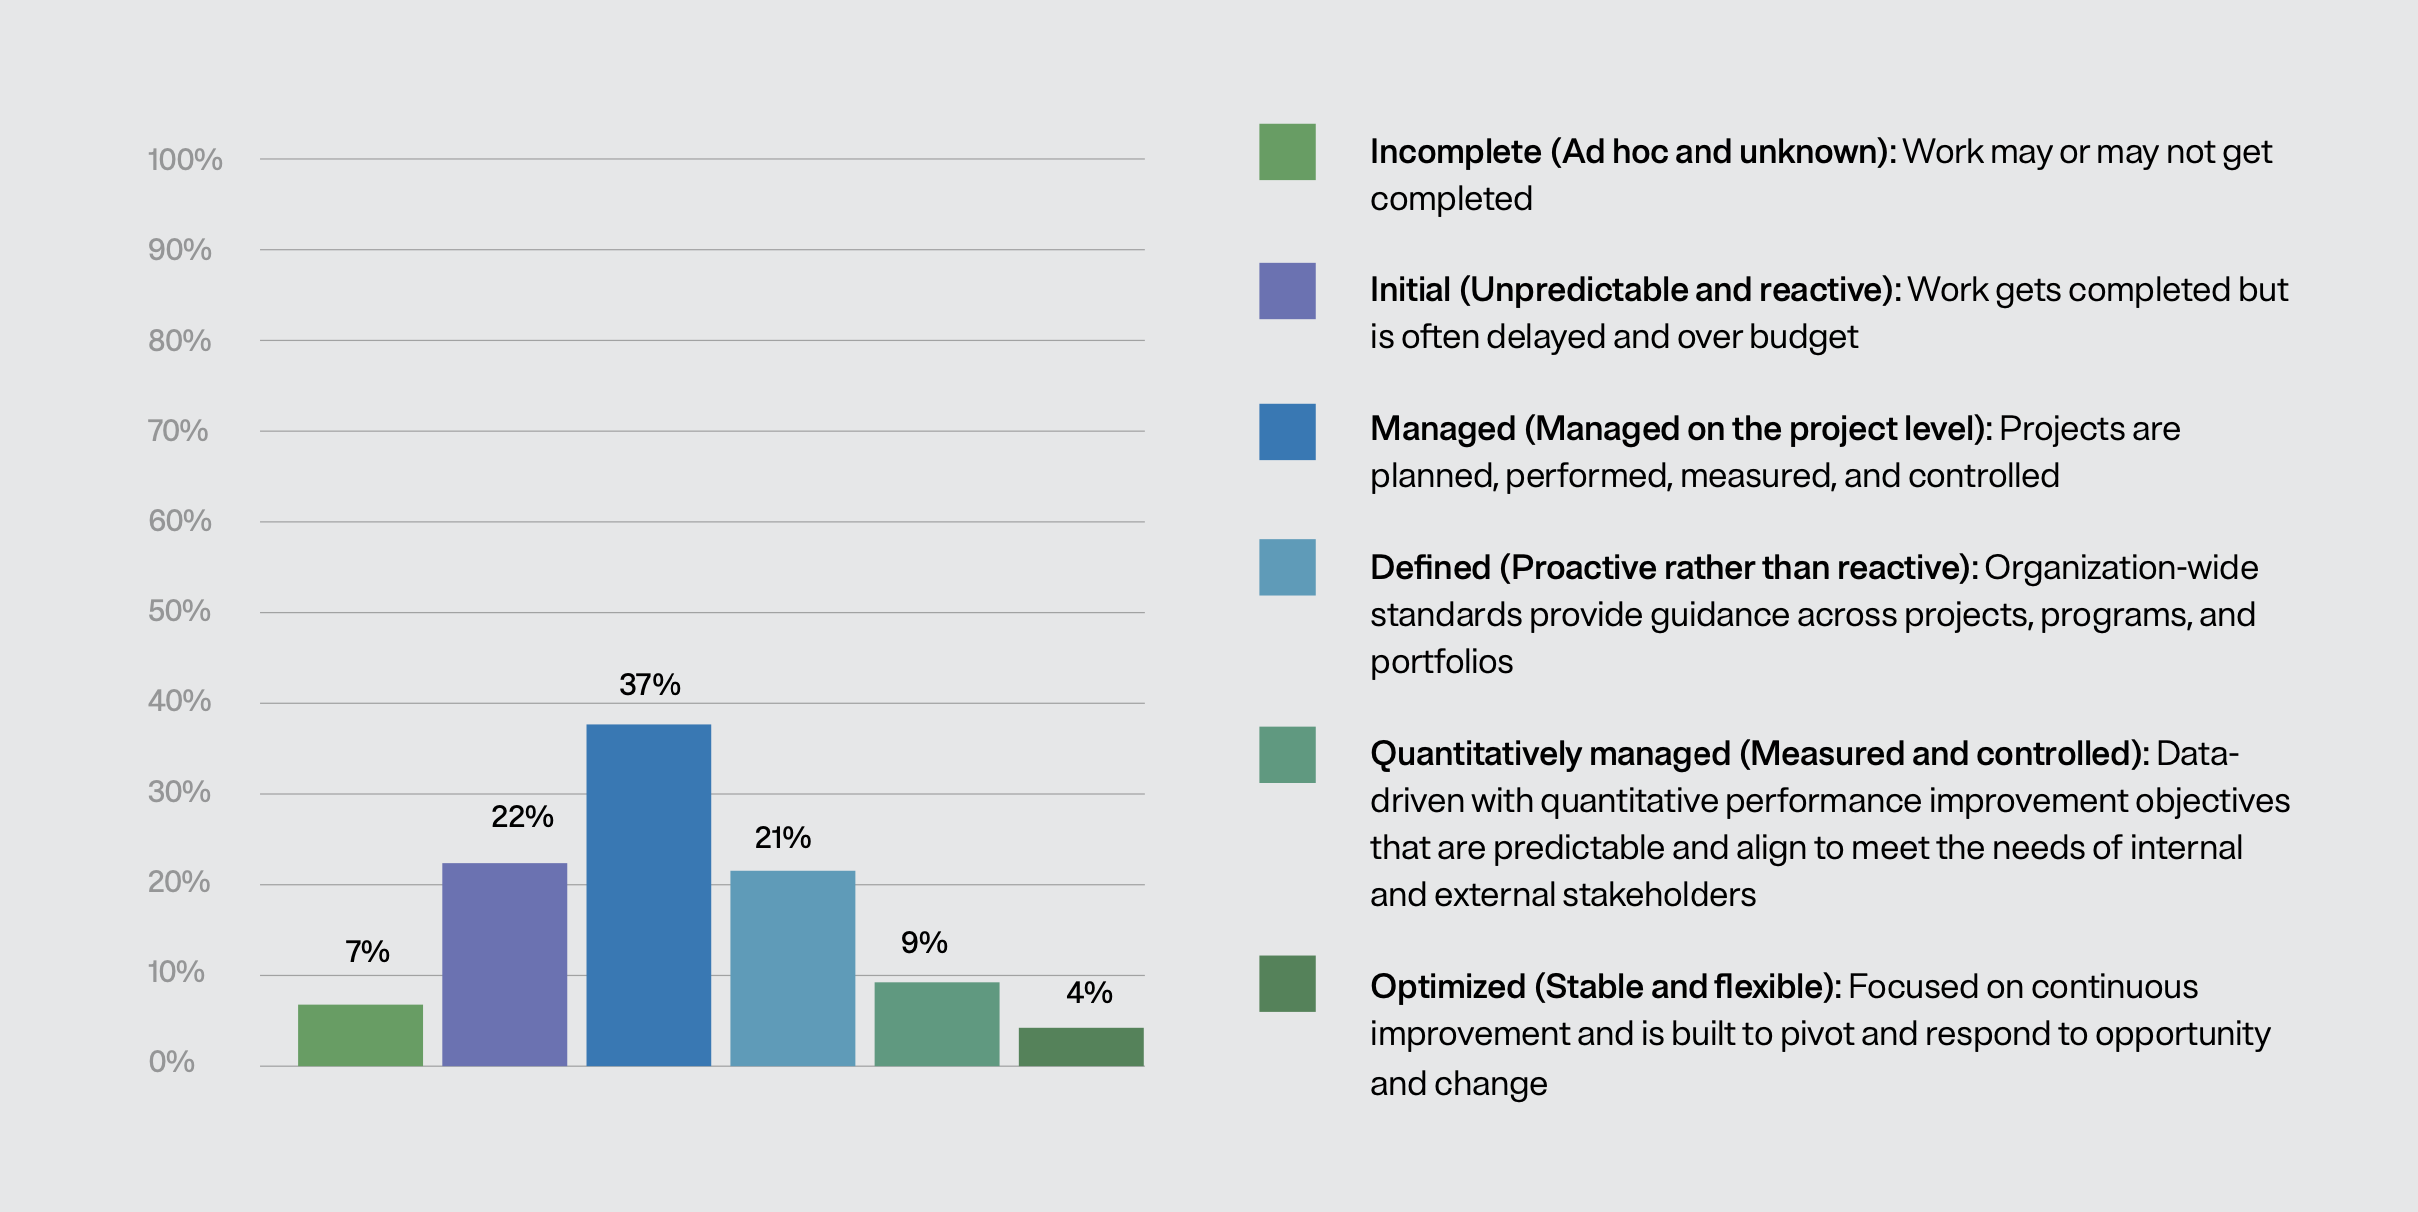 Bar graph showing the results from a recent poll on how cybersecurity professionals rate their organization's cyber risk management program's maturity.